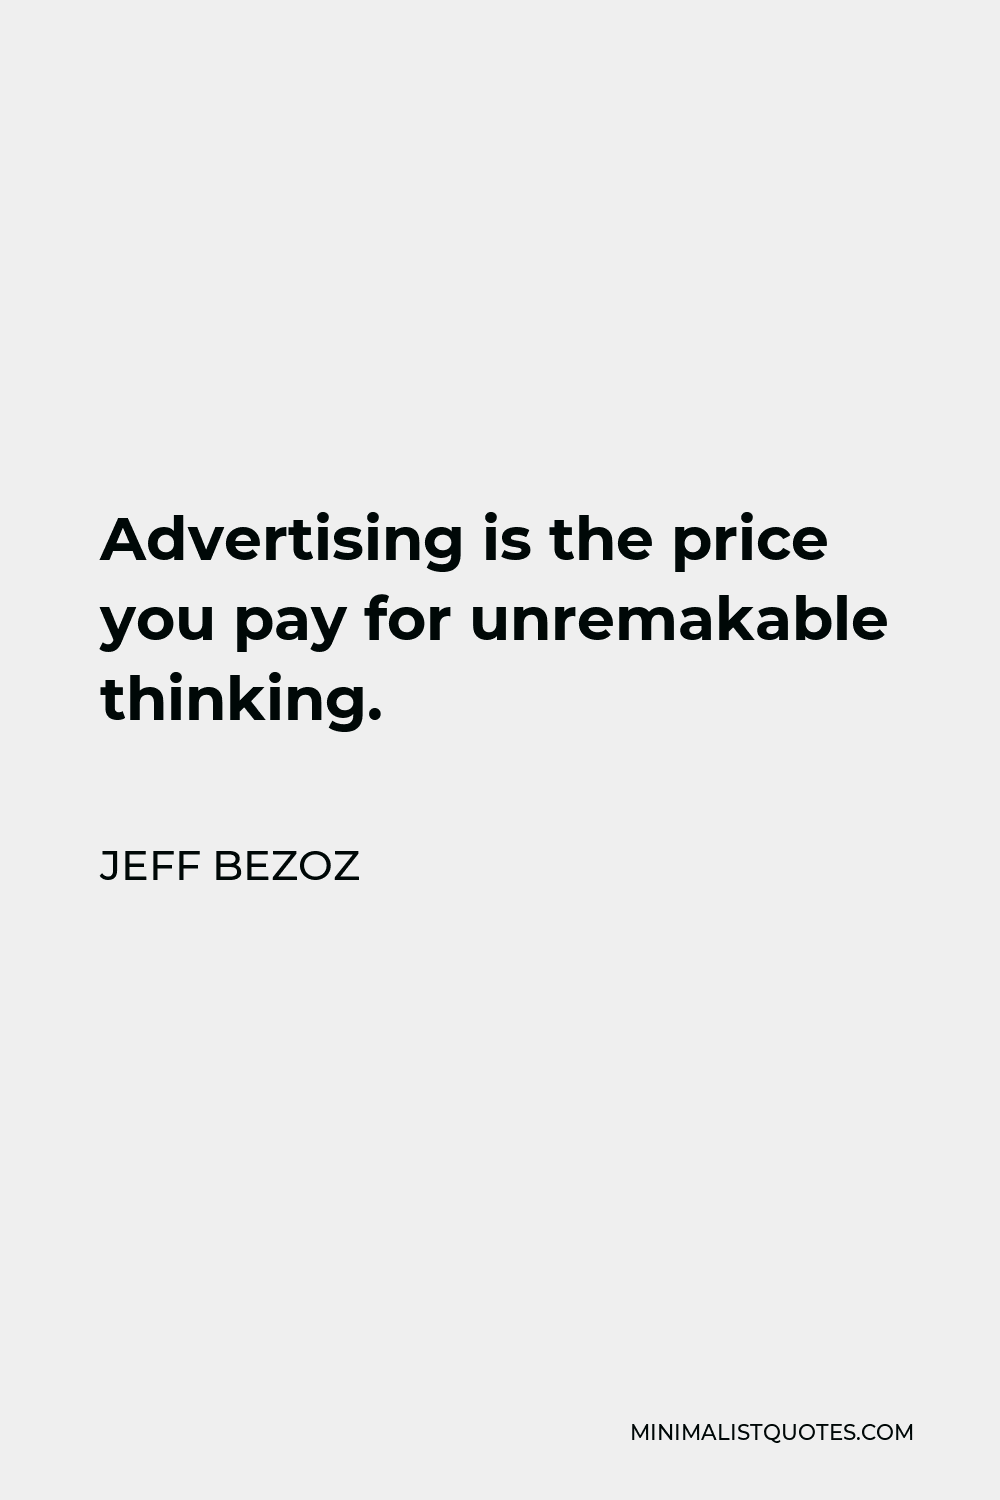 Jeff Bezoz Quote - Advertising is the price you pay for unremakable thinking.